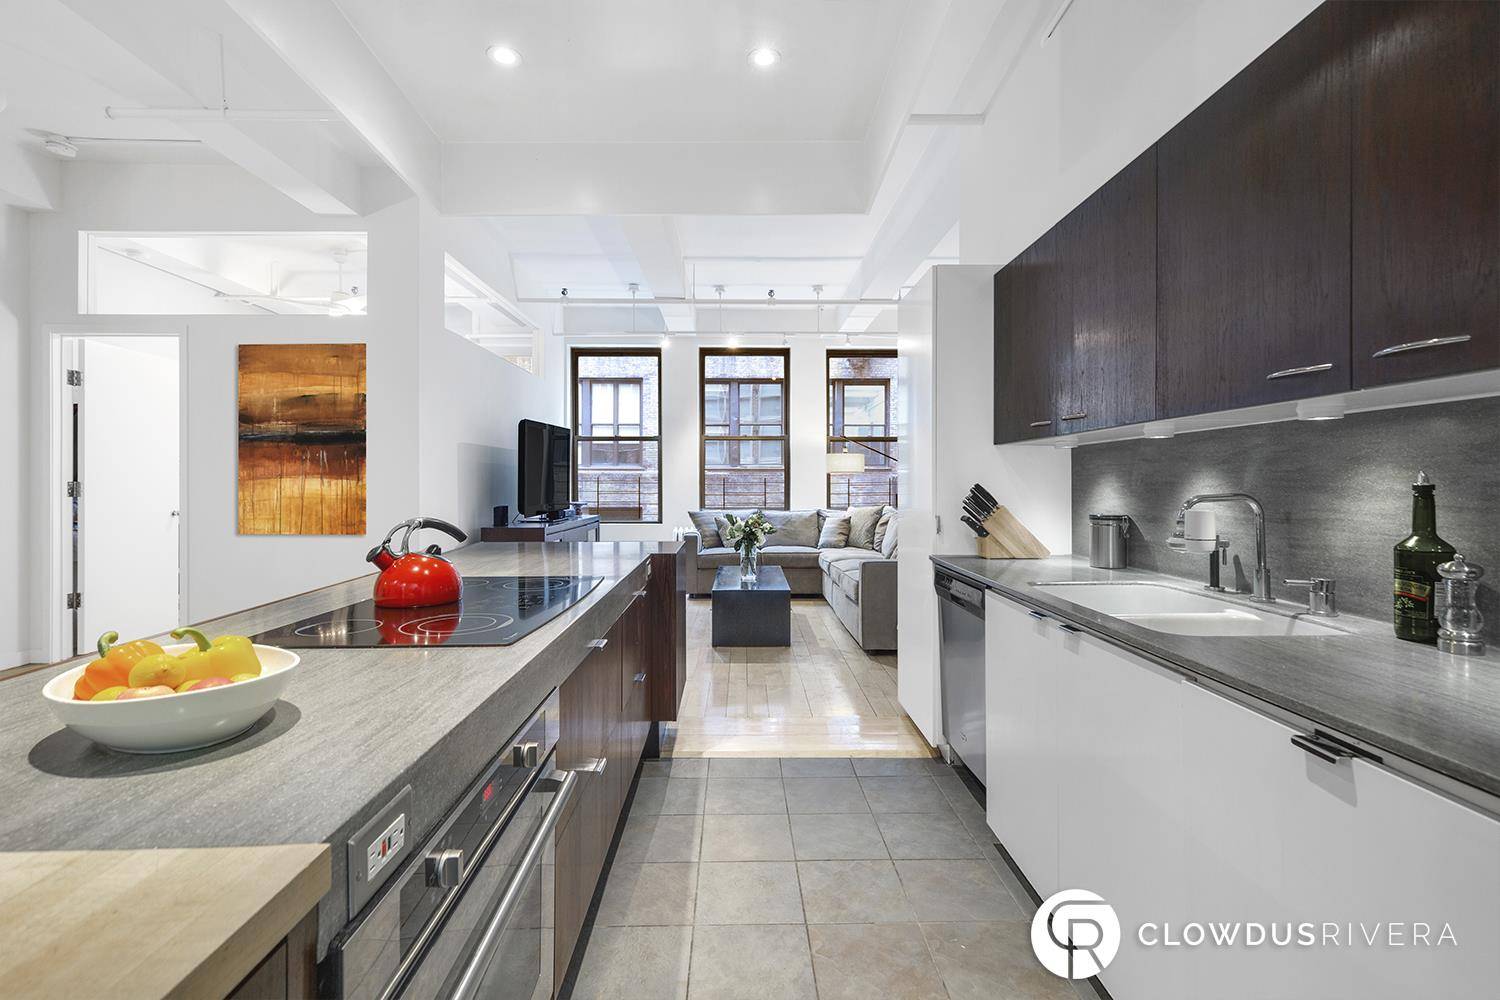 THE PERFECT FASHION DISTRICT LOFTDylan House 241 West 36th Street, Apt 6RYOUR HOMEWelcome home to this fashionable, luxury loft located in Dylan House an historic, Art Deco live work cooperative ...